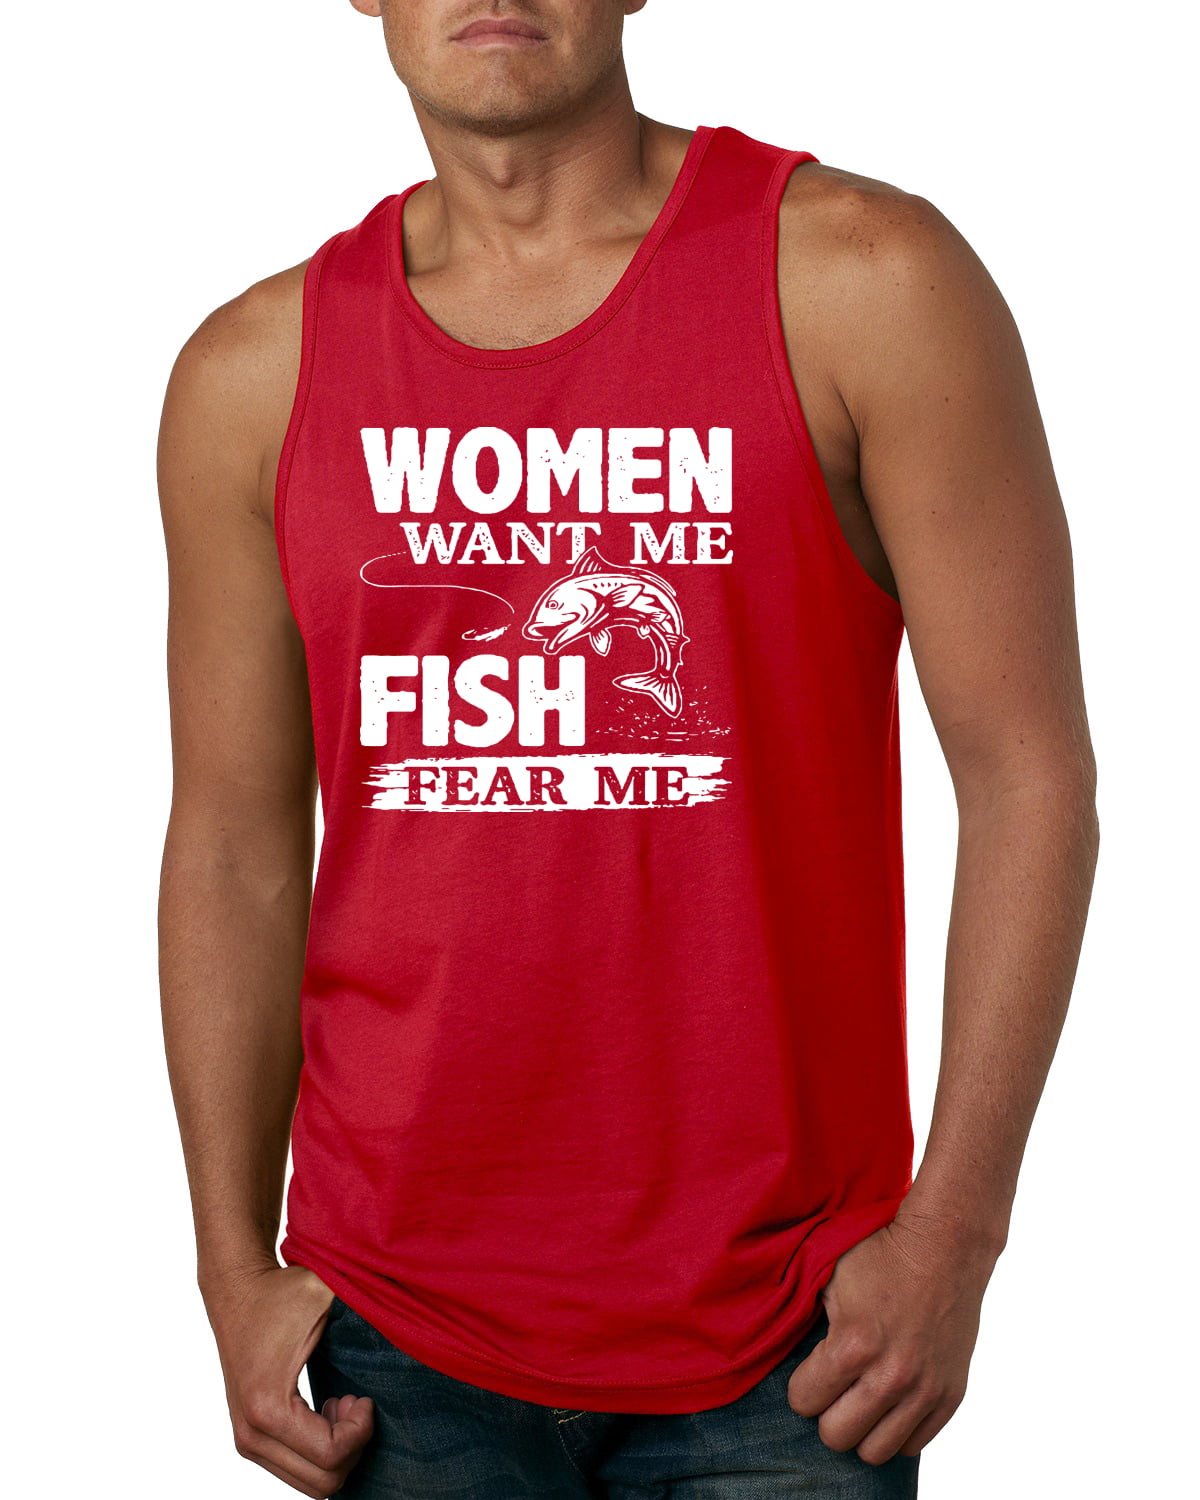 Wild Bobby, Woman Want Me Fish Fear Me, Fishing, Men Graphic Tank Top, Red,  Small